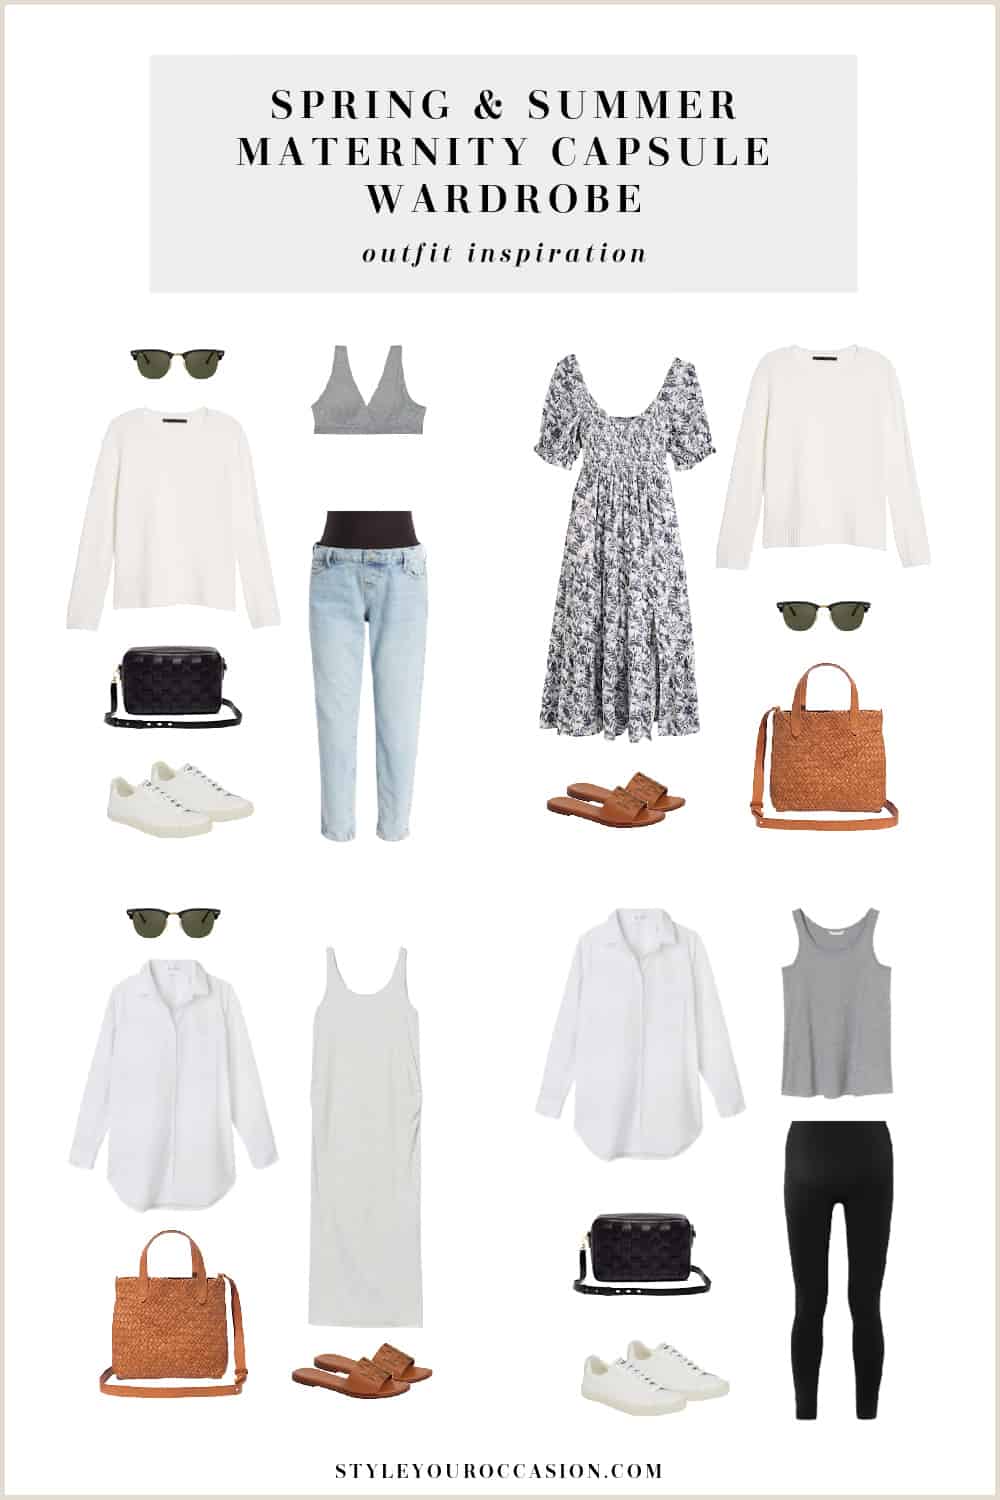 Pinterest collage of a maternity capsule wardrobe outfits for spring and summer with neutral clothing items, shoes, and accessories